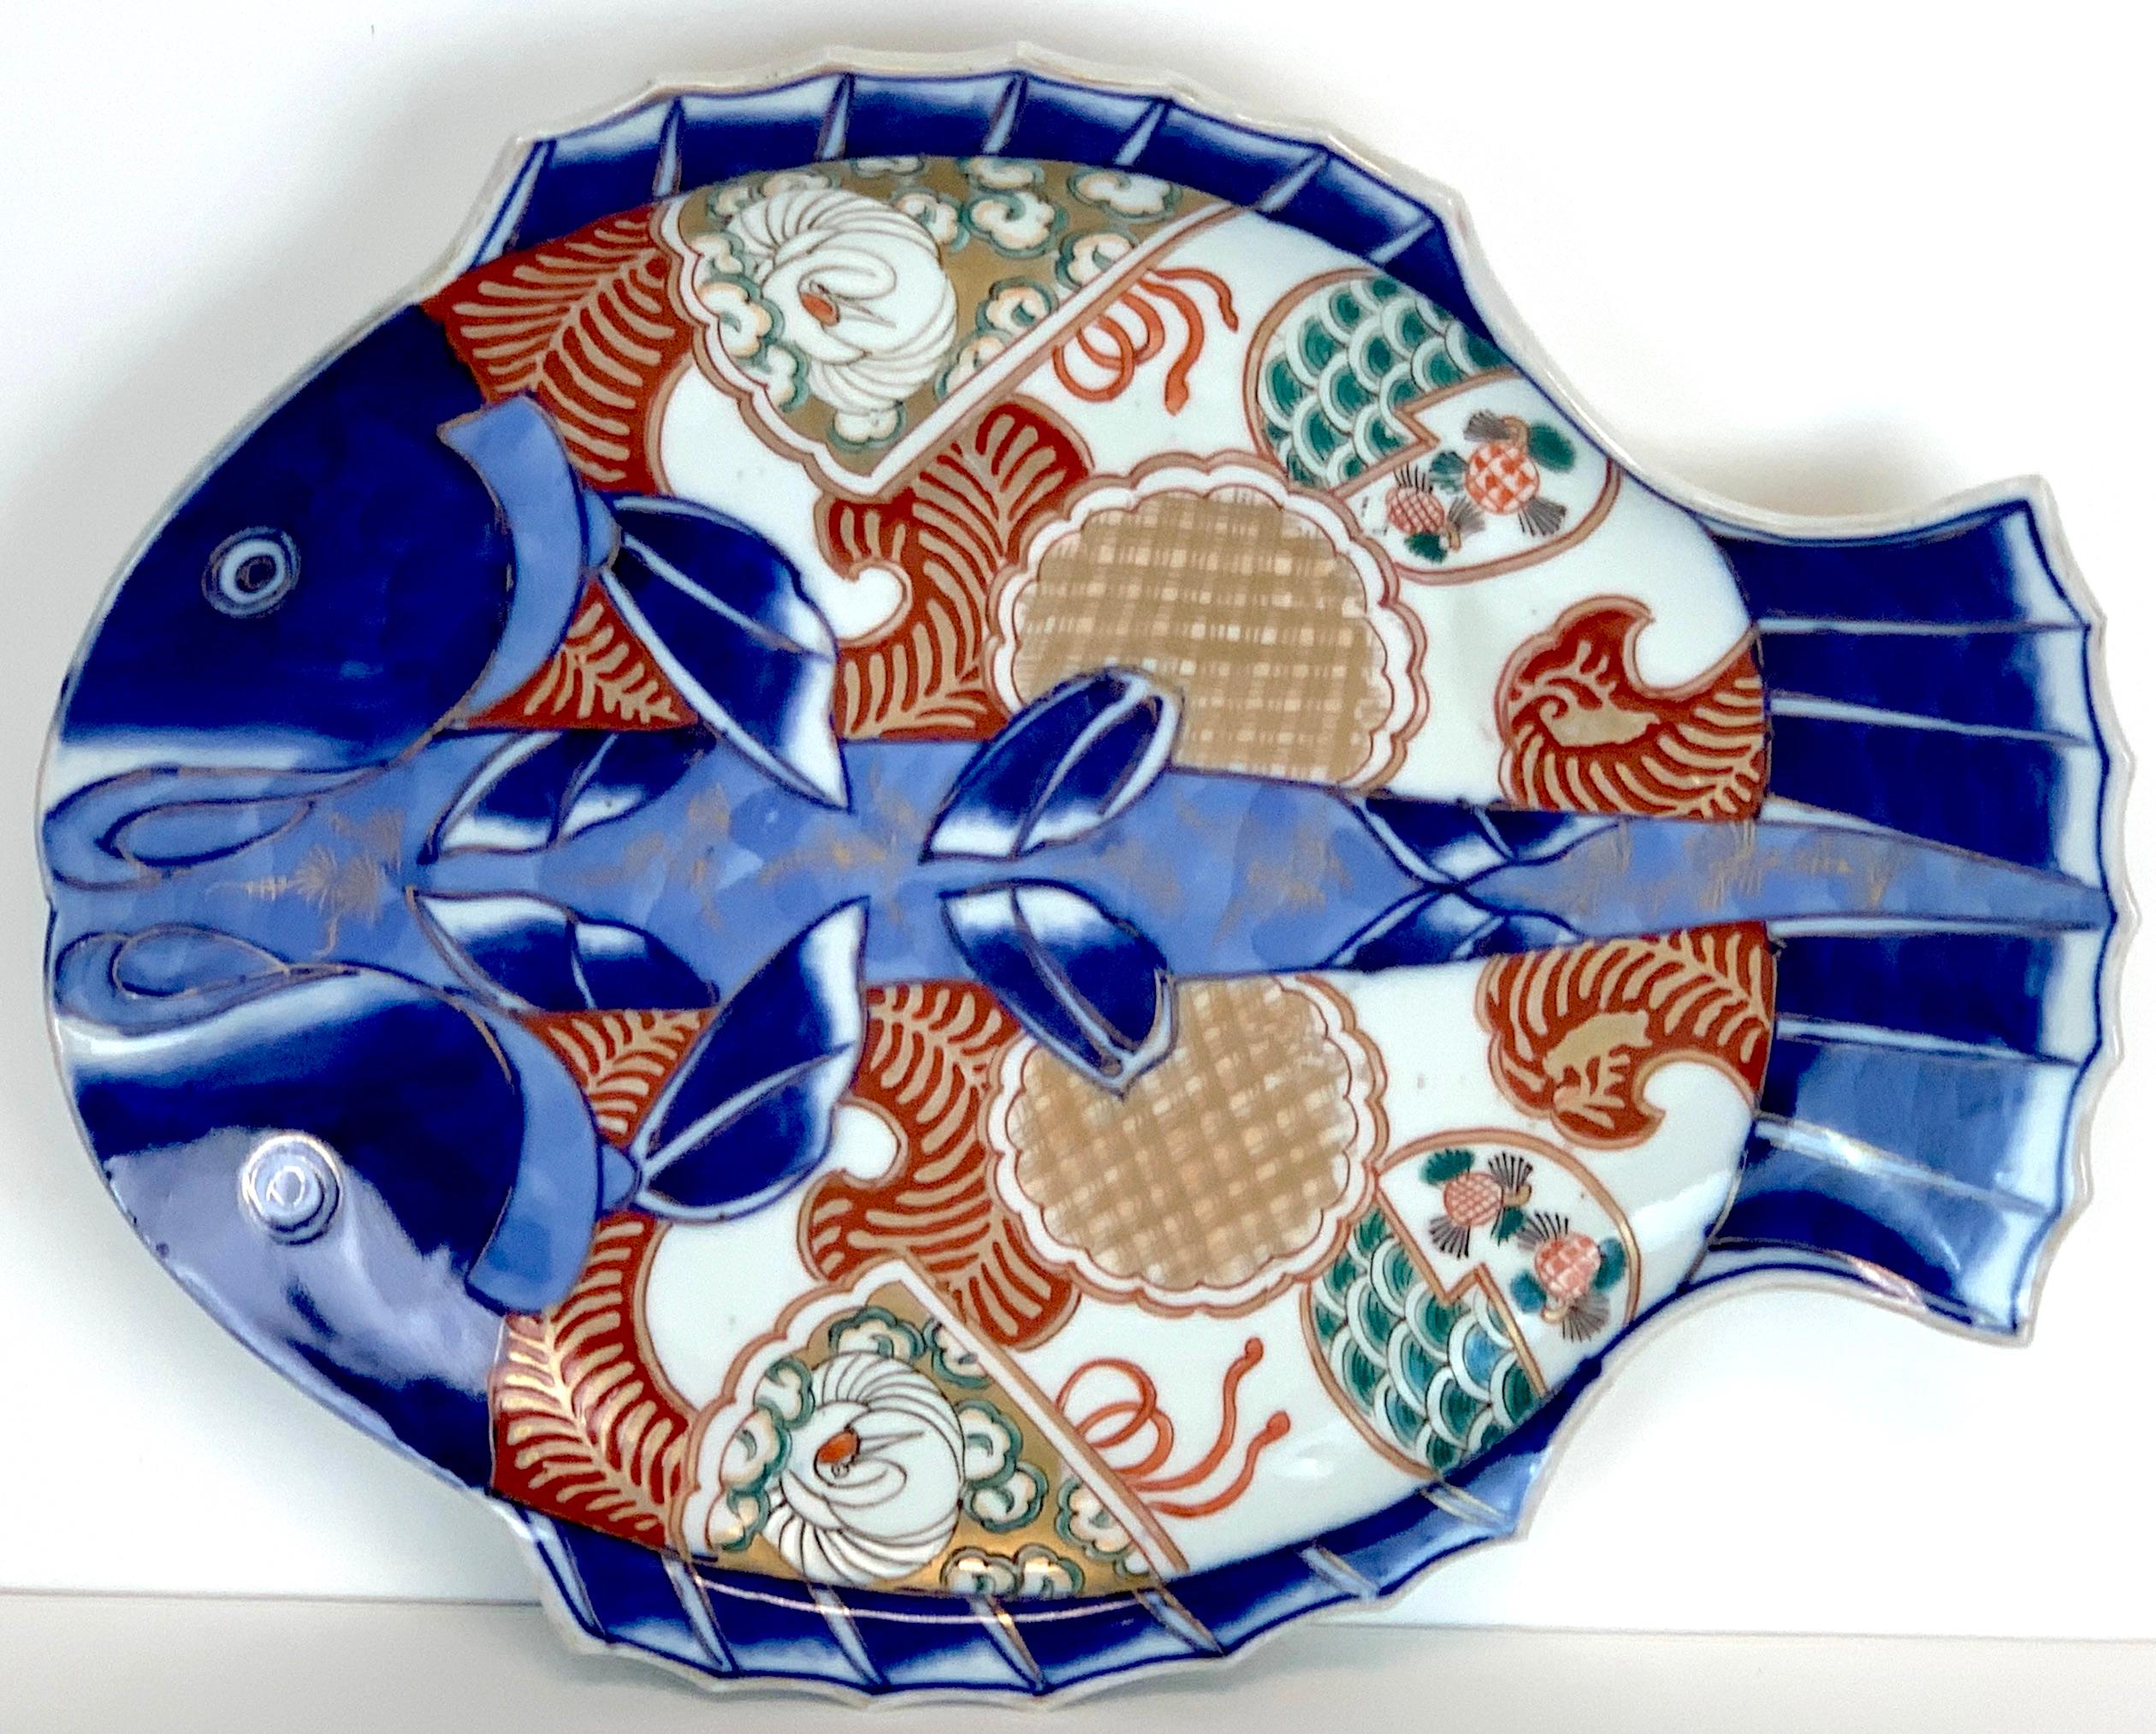 Meiji Imari Celadon fish plate IV
A fine example, well decorated, good size, Unmarked, circa 1890
This examples measures 11-inches wide x 9.5-inches high.
Part of a collection of eight fine Imari examples, The IV is for internal inventory